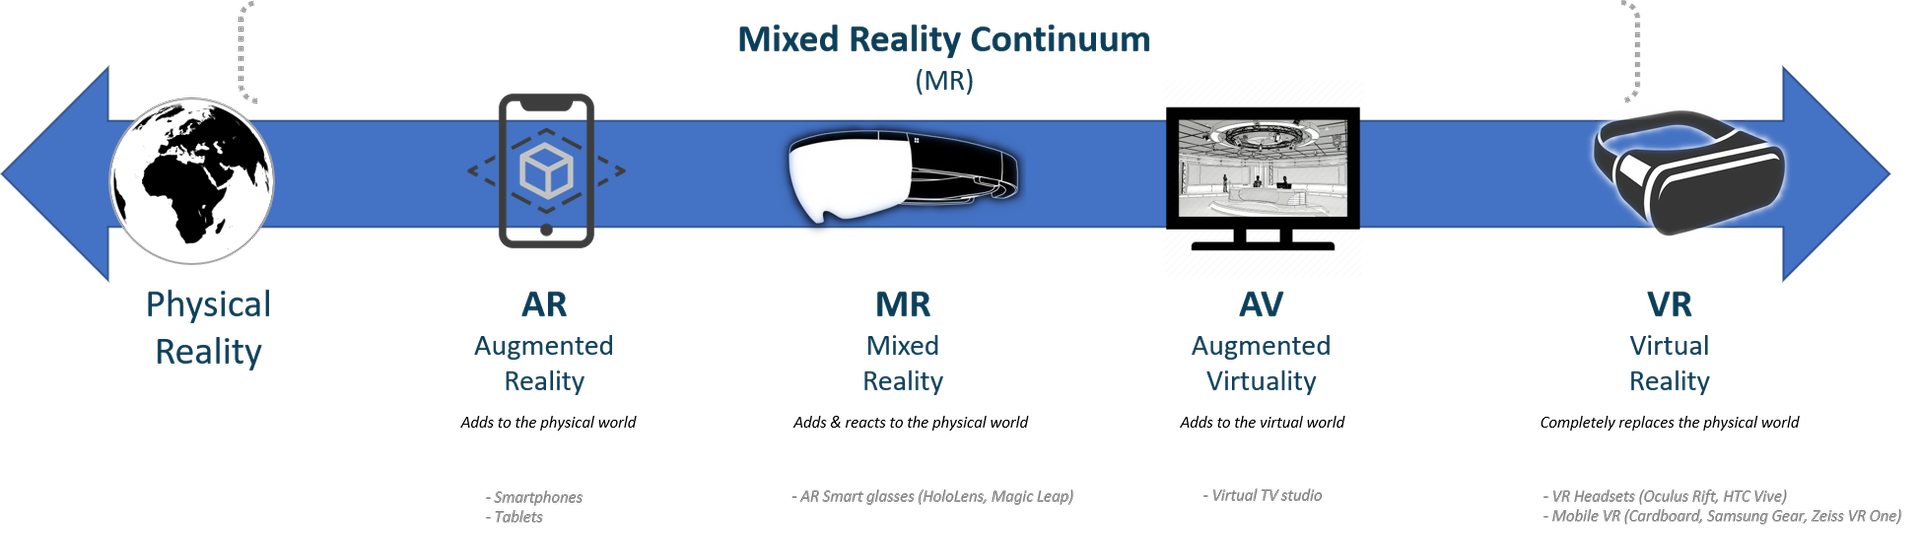 Image of all Extended Reality technologies